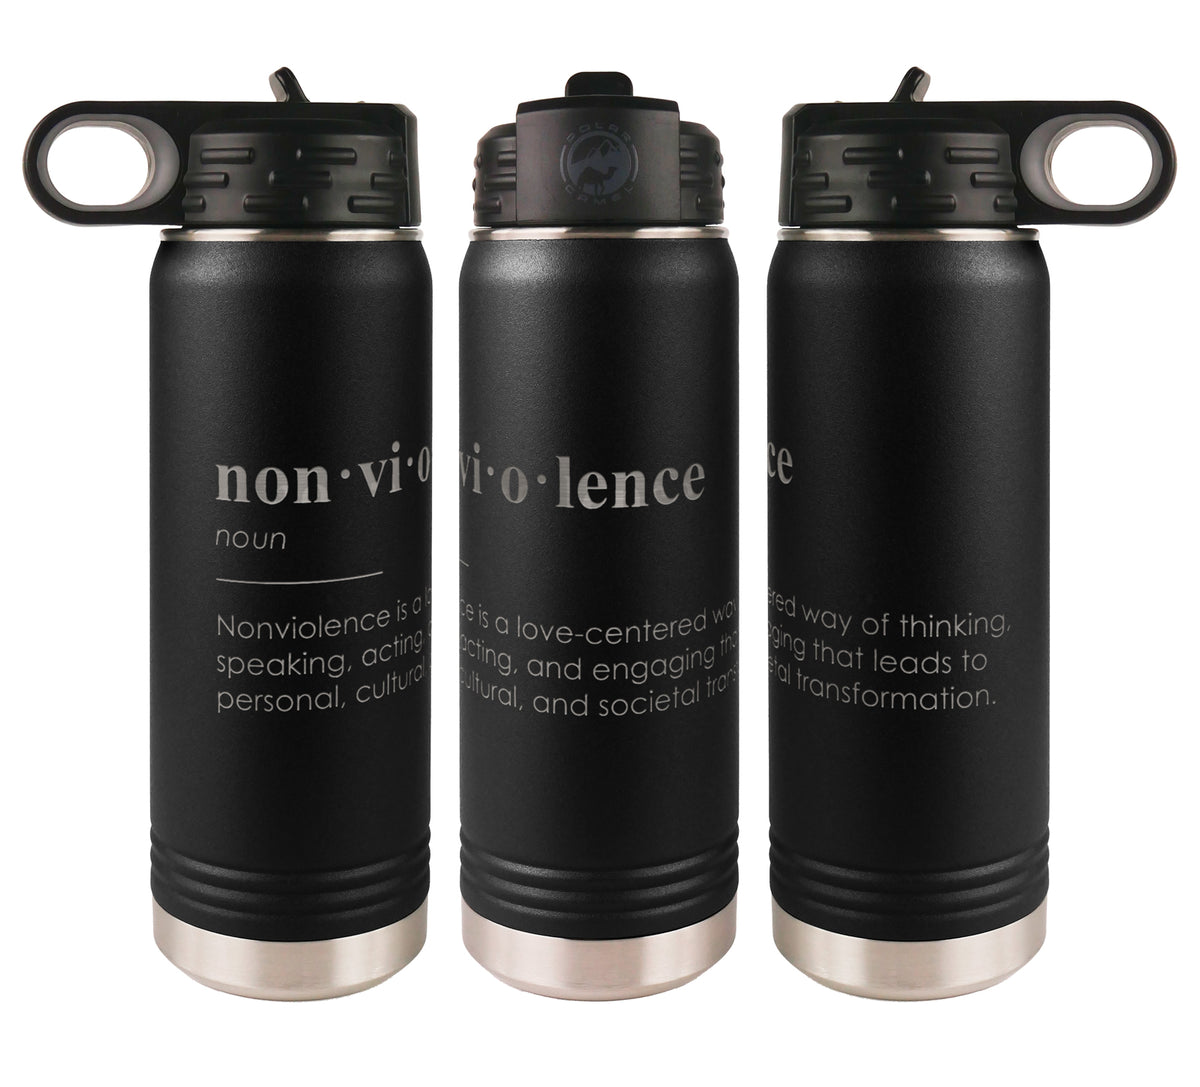 Nonviolence Definition Water Bottle